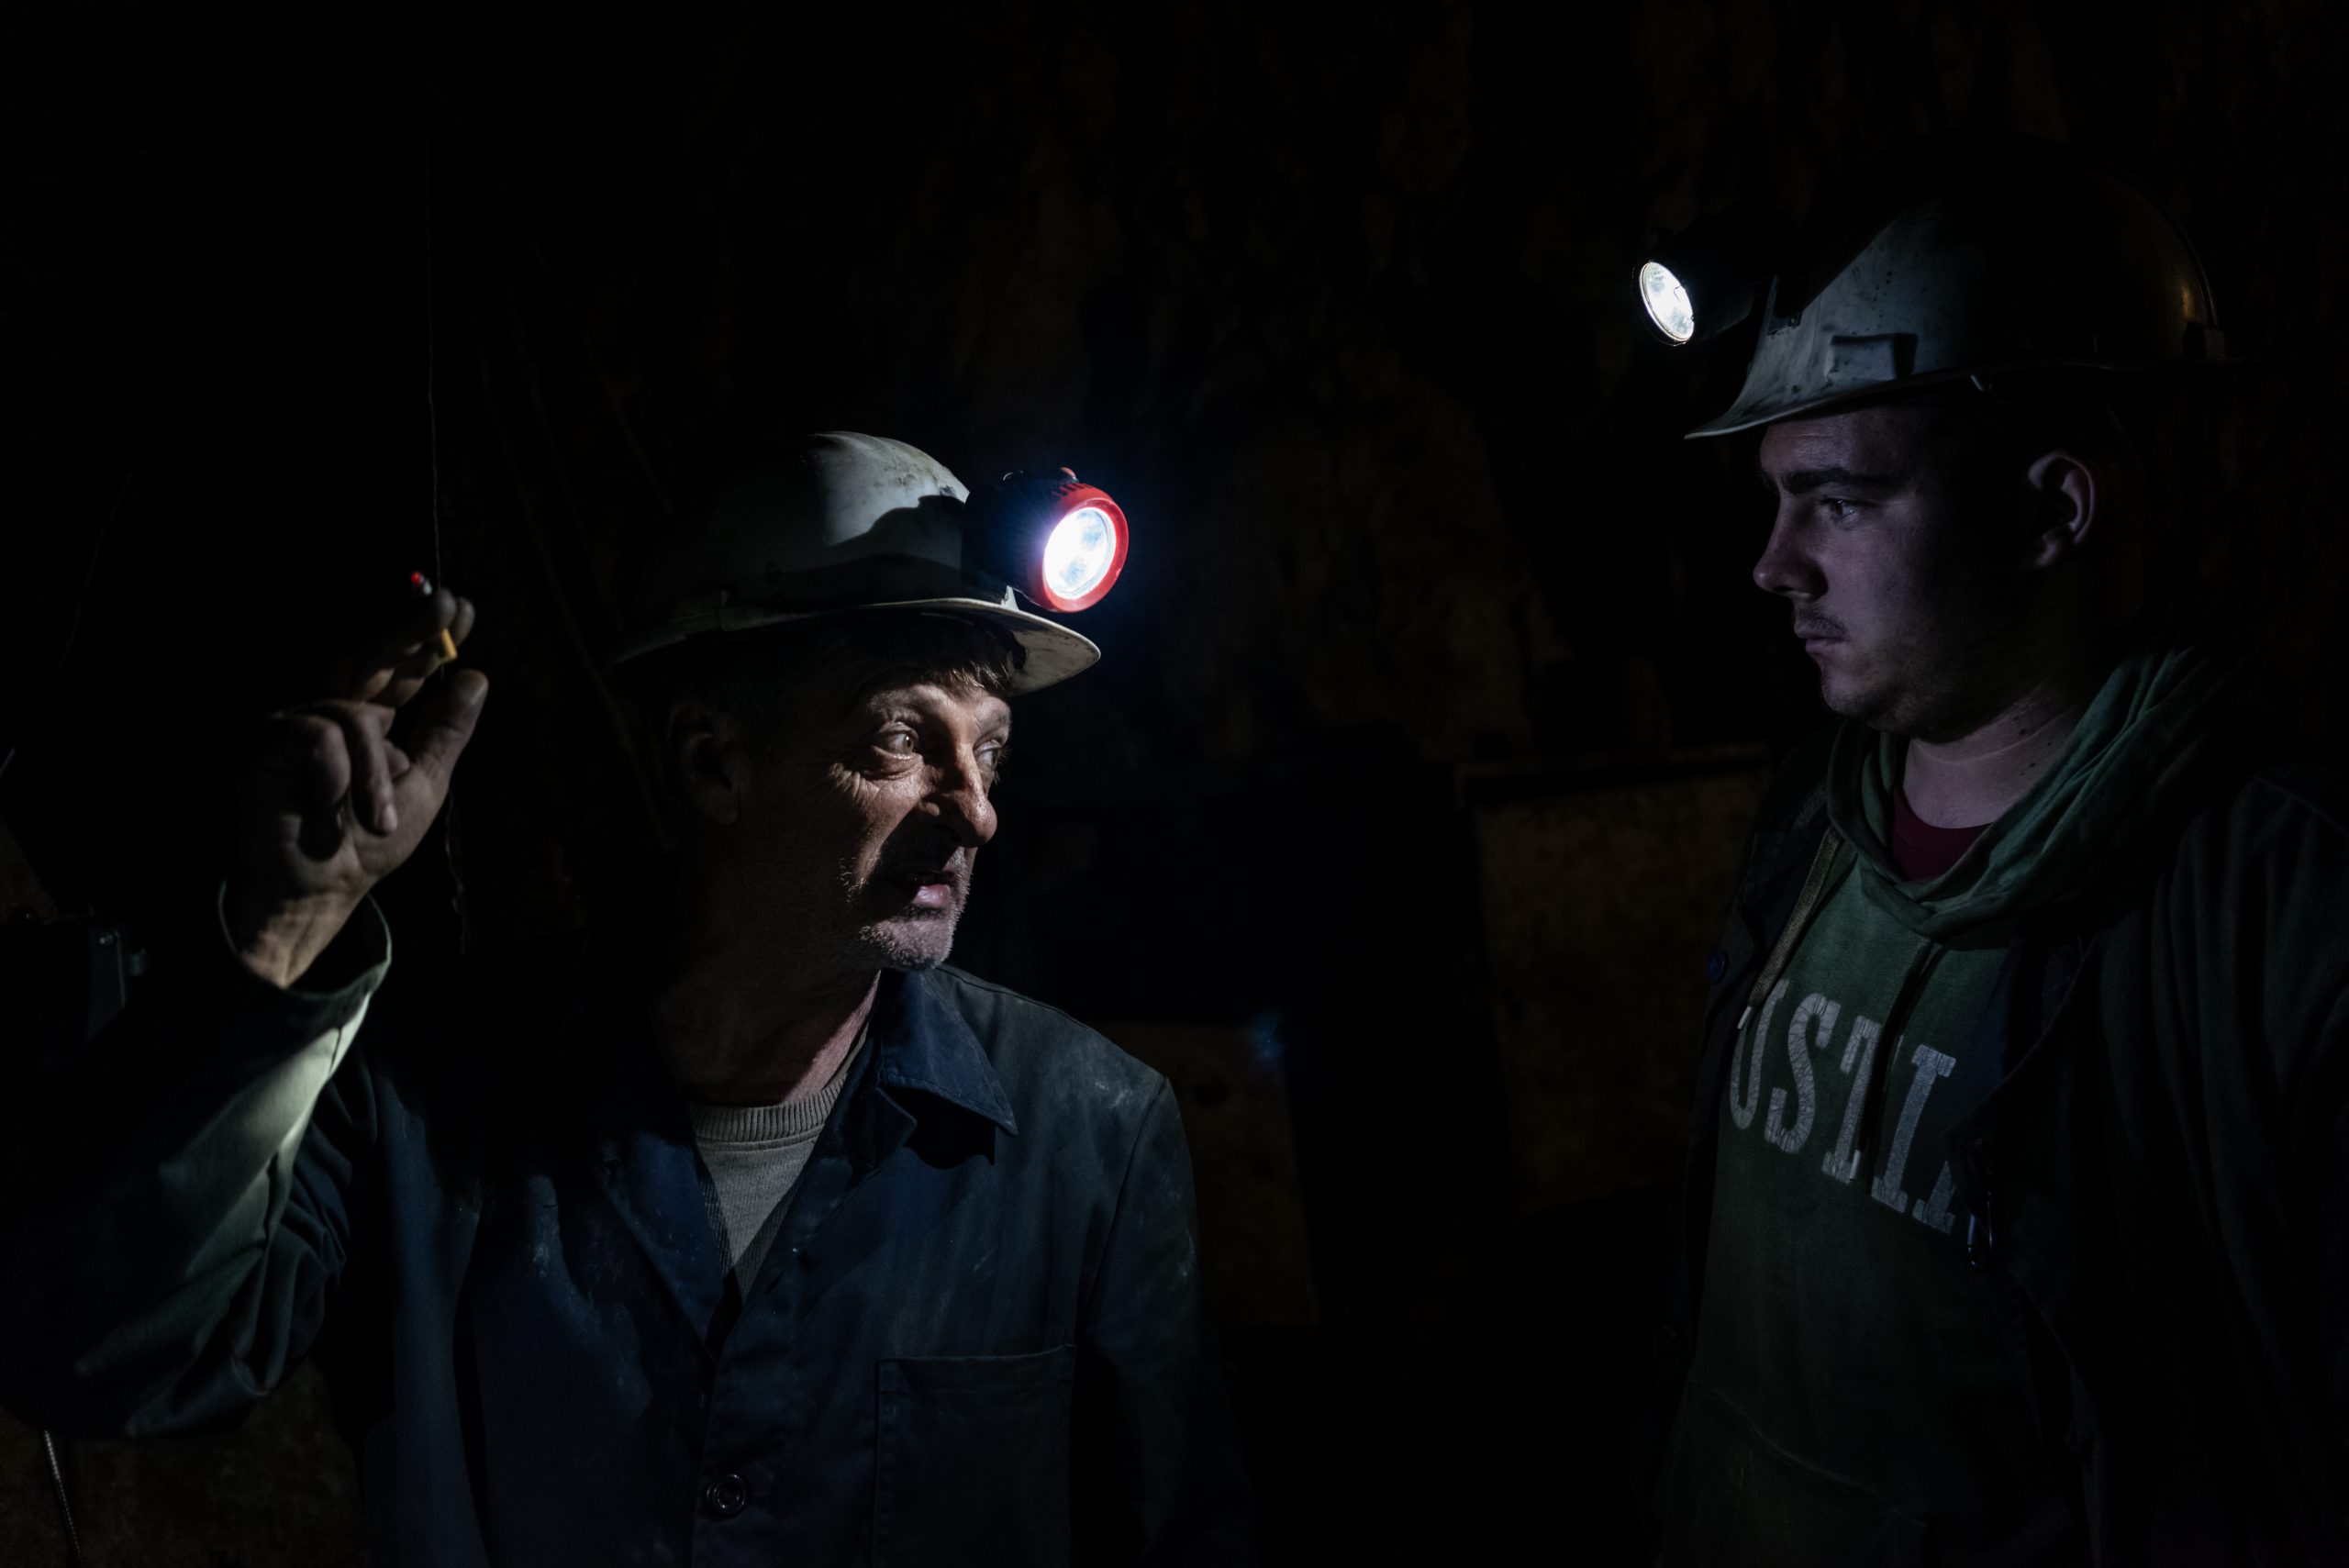 Miners on their way to work in the galleries at the Trepça mine site in Crnac.